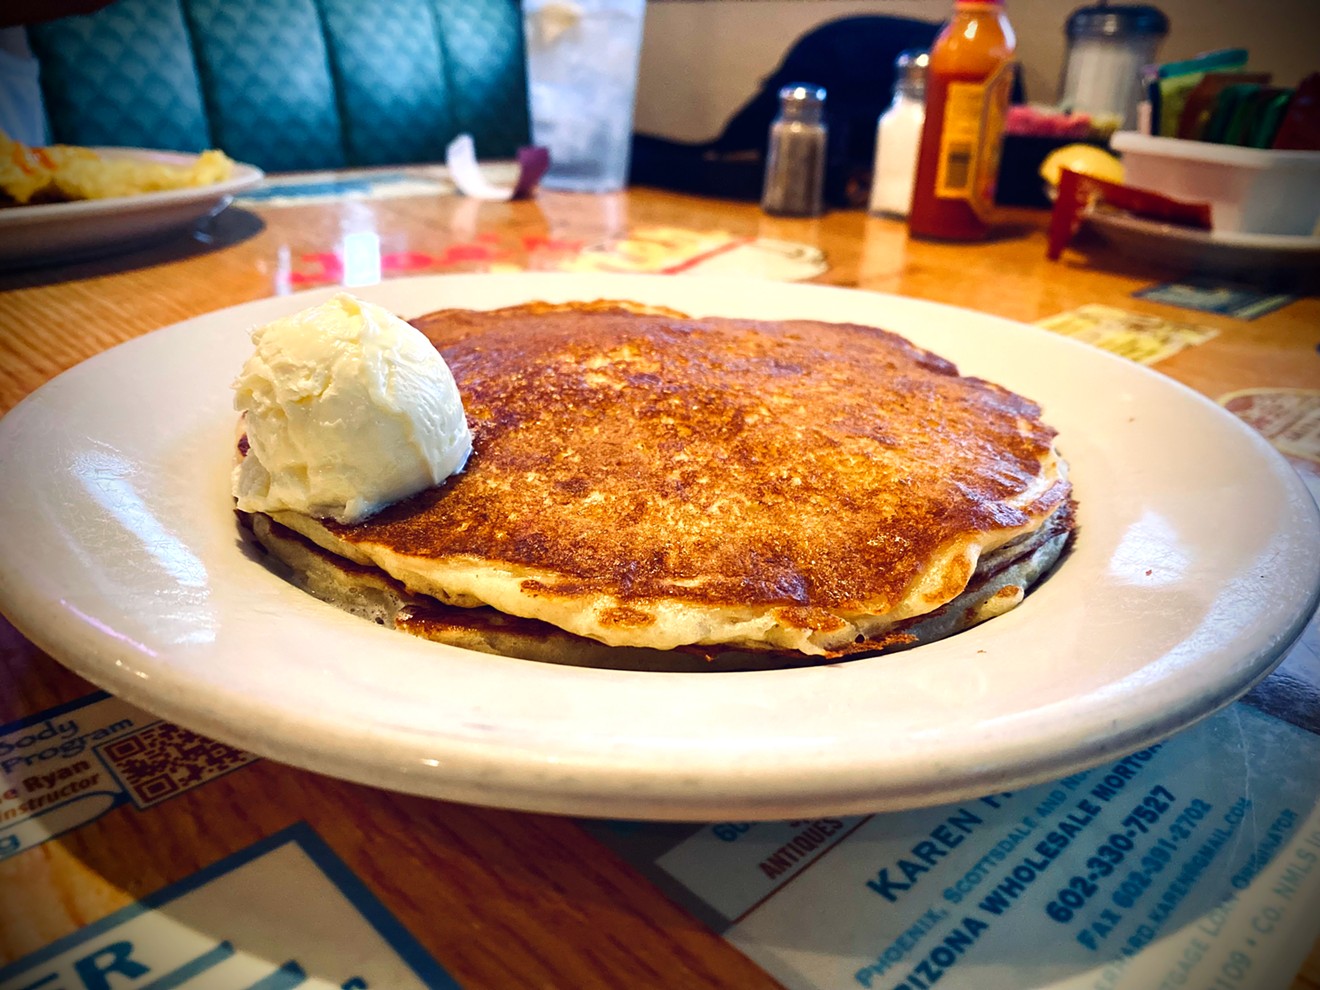 The buttermilk pancakes at Joe's Diner are the real deal.